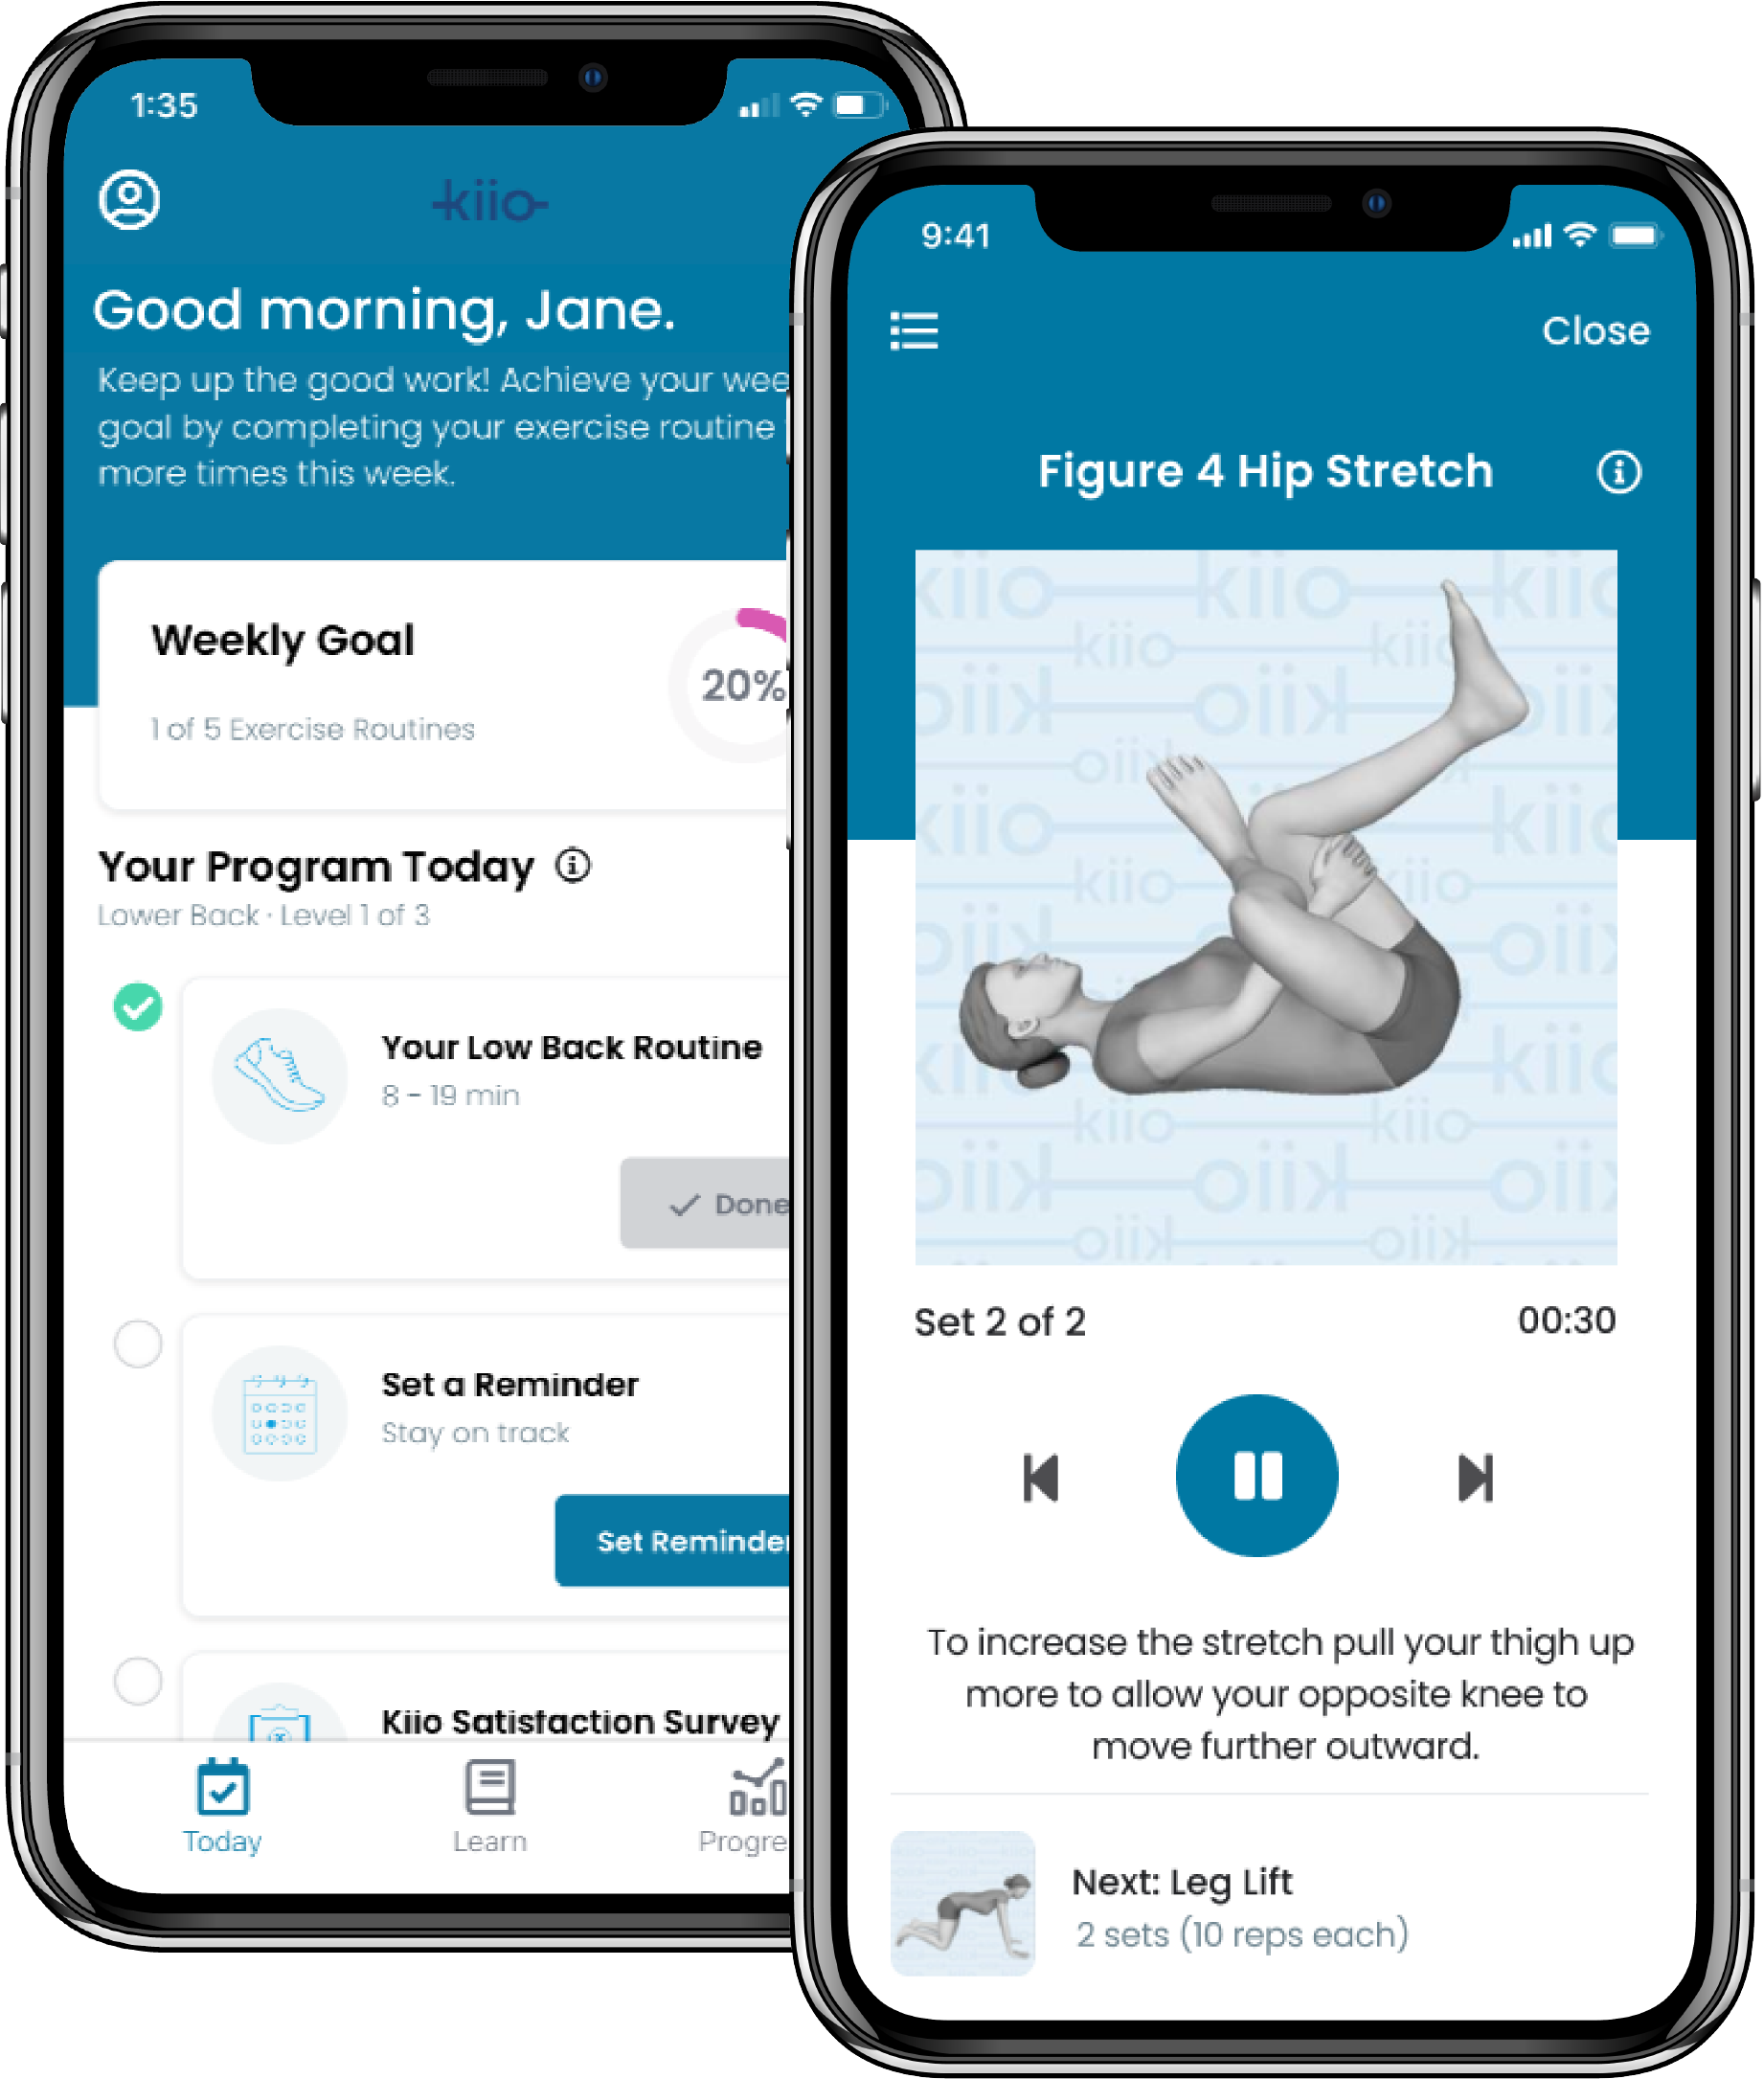 Kiio's simple, easy, and effective digital MSK therapy integrates clinical practice guidelines and advanced software to deliver on-demand, personalized therapeutic exercise and interactive virtual coaching using only a member’s smartphone or tablet – no waiting equipment, scheduling a consult, or learning how to use sensors or motion tracking. 